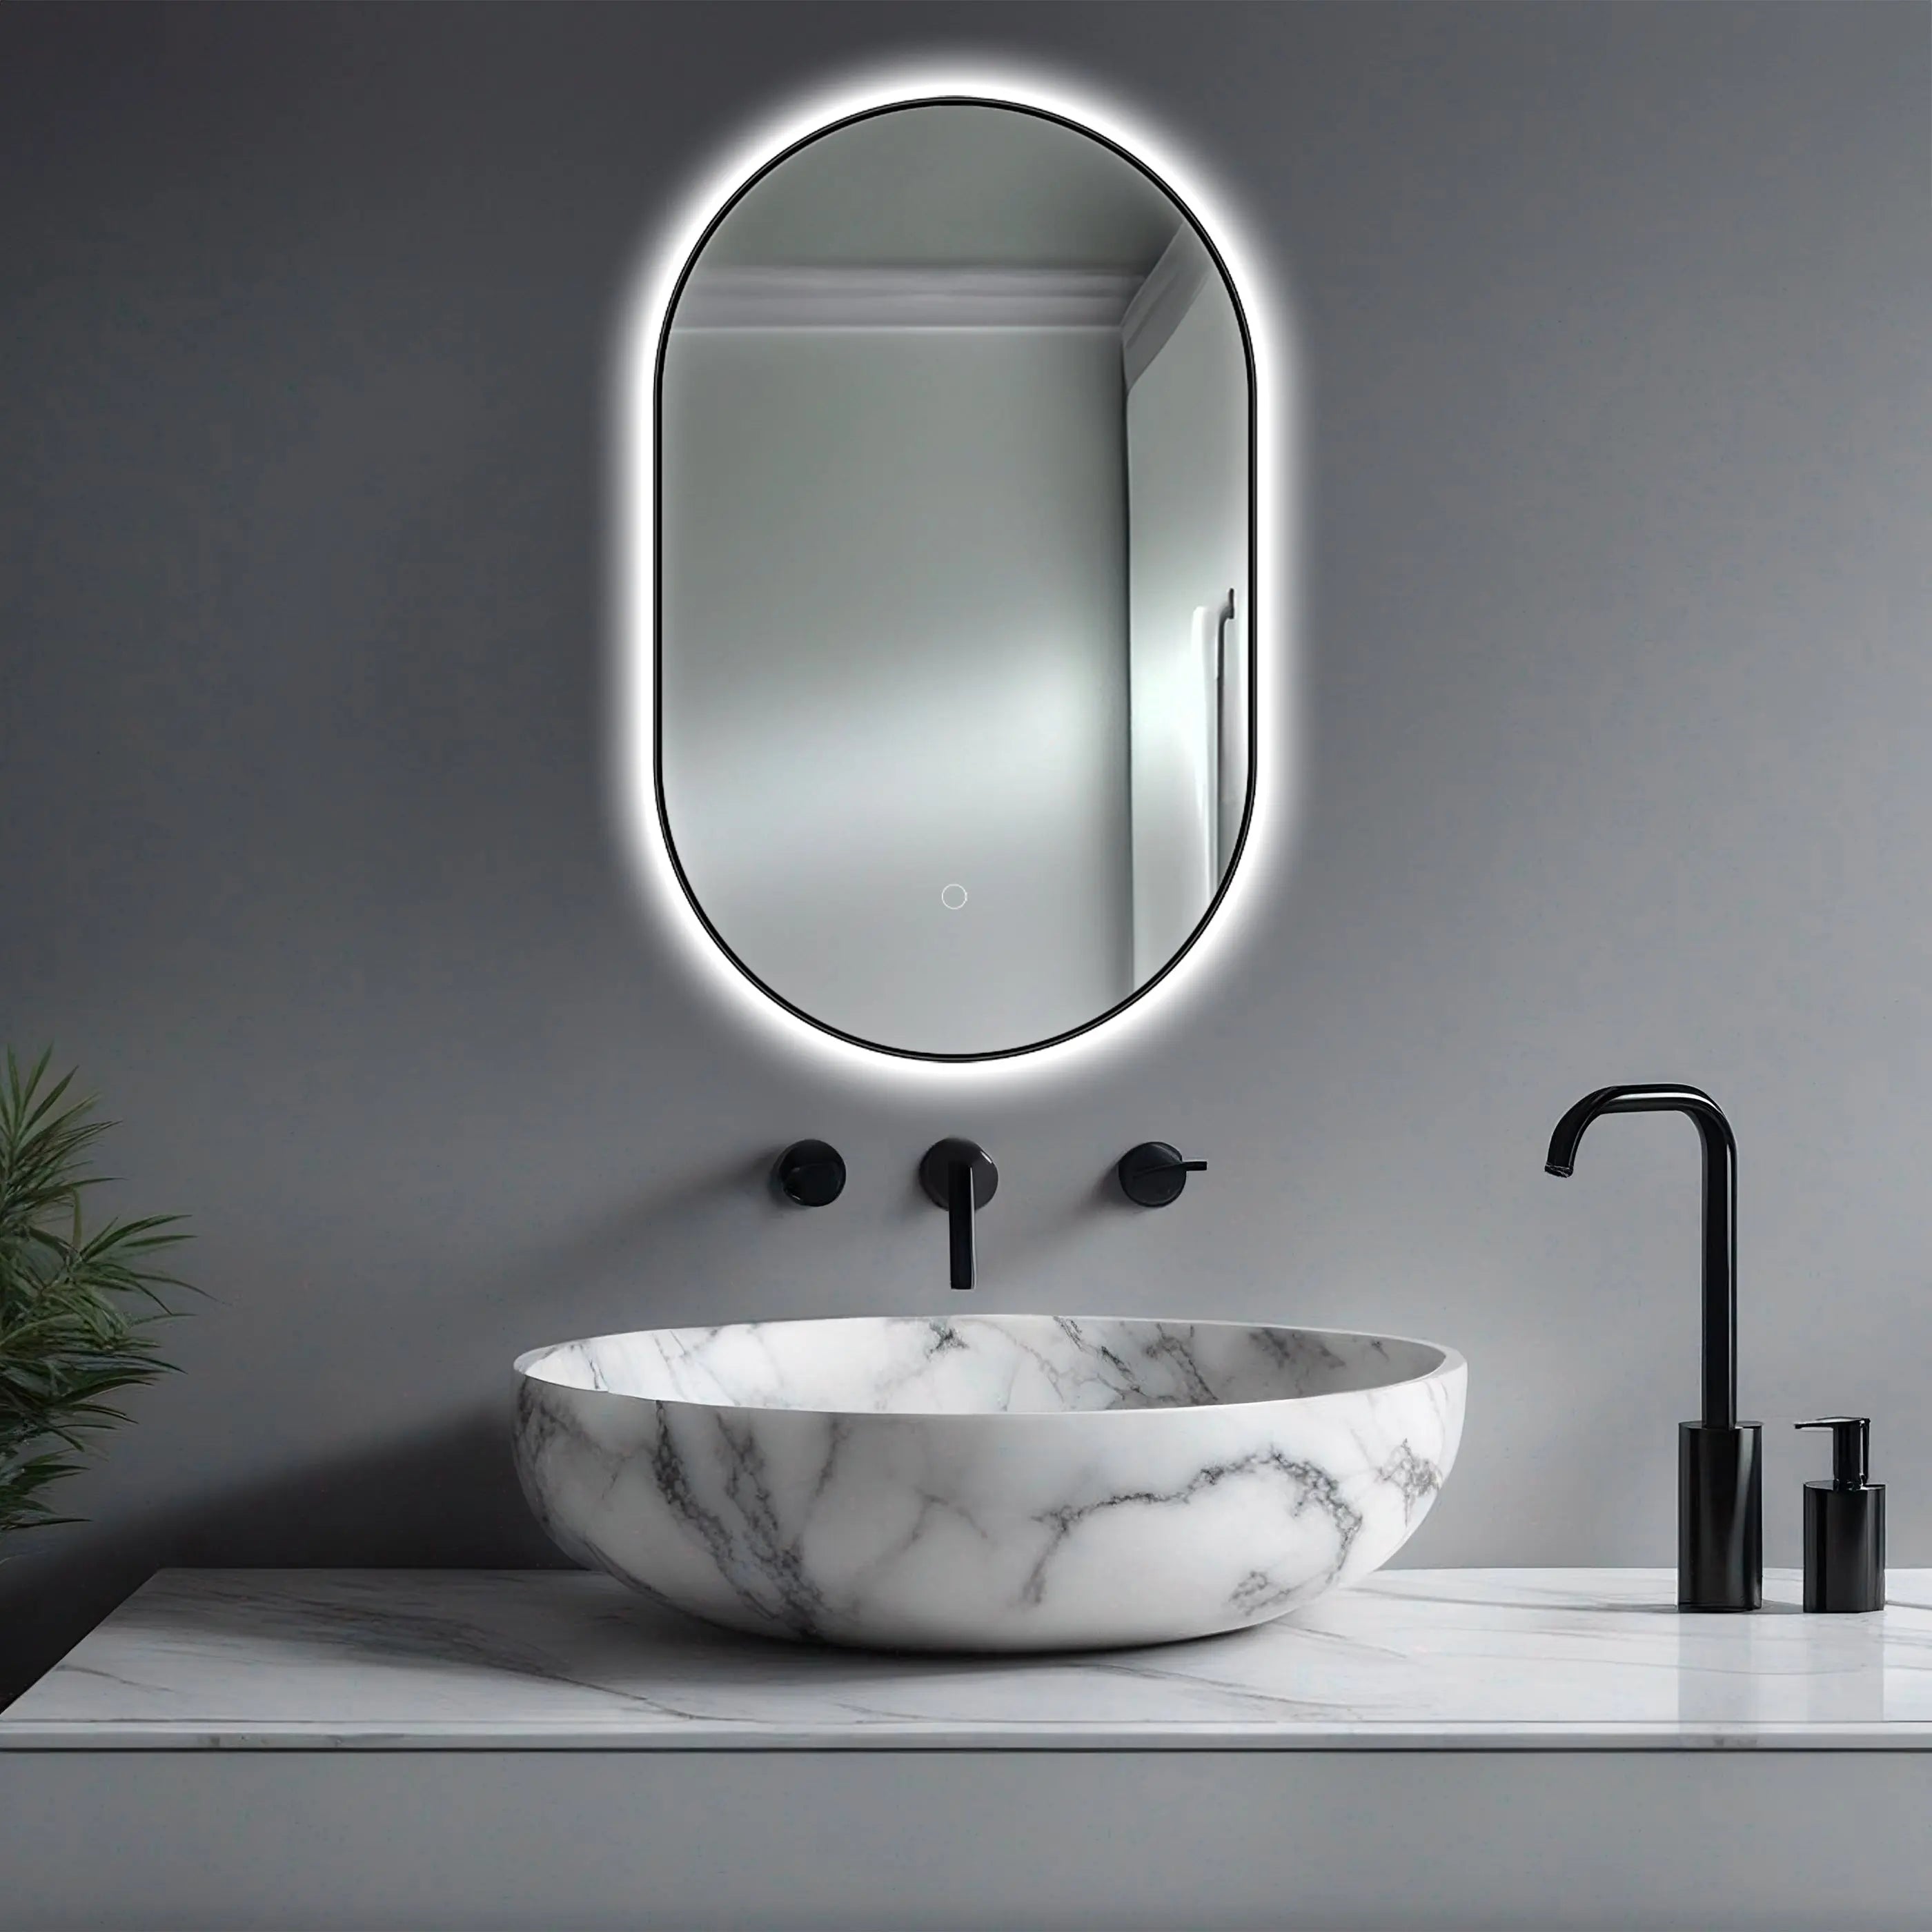 Olivia 20" W x 32" H LED Lighted Bathroom Mirror with Dimmer & Defogger in Black Dreamwerks LED Mirror